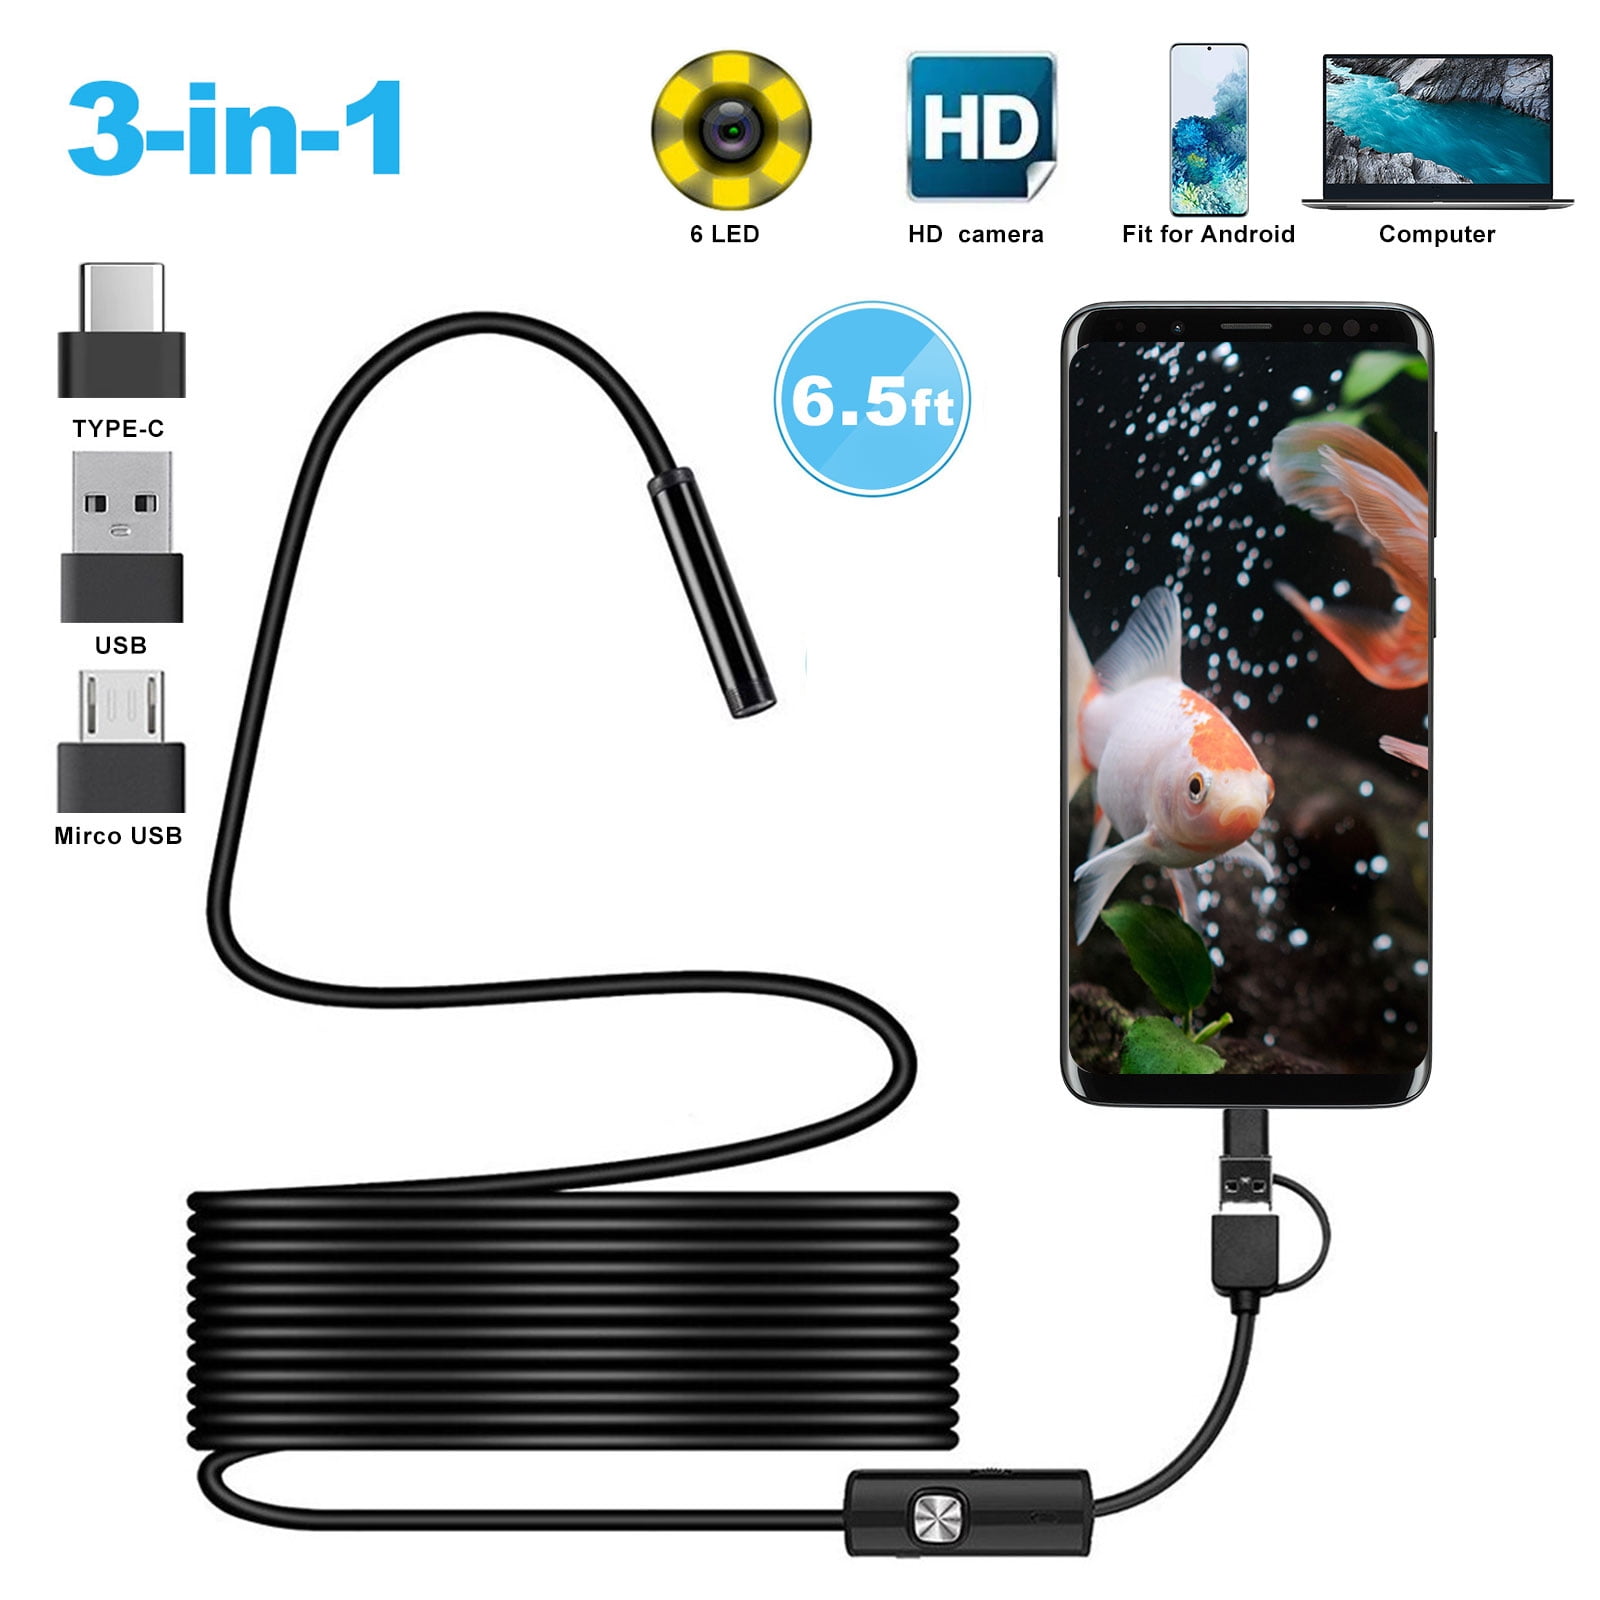 USB Endoscope MASO 2 in 1 IP67 Waterproof Borescope Inspection Camera with 6 Led and 7 M Snake Cable USB Adapter for Android Phone Tablet Device 2 M Cable Length